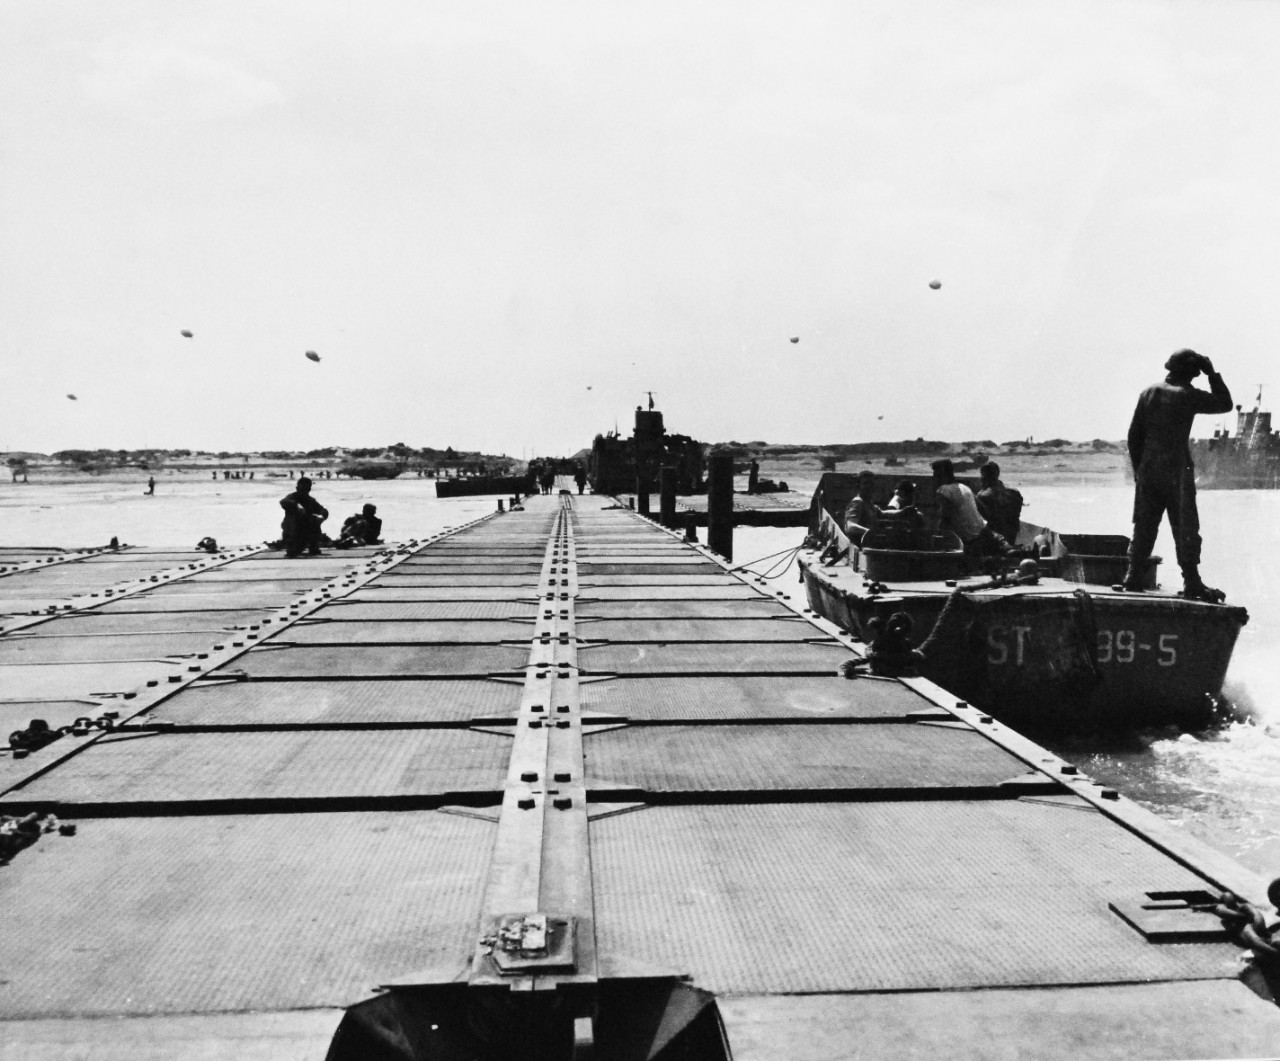 80-G-257325:  Normandy Invasion, Mulberries, 1944.  Pontoon causeway stretching from Allied beachhead in Normandy, France.  LCT’s are unloading.  An LCVP is tied up at right.  Nearer shore, LCT 447 is unloading.  Photograph received 3 October 1944.  Official U.S. Navy Photograph, now in the collections of the National Archives.  (2014/10/28).